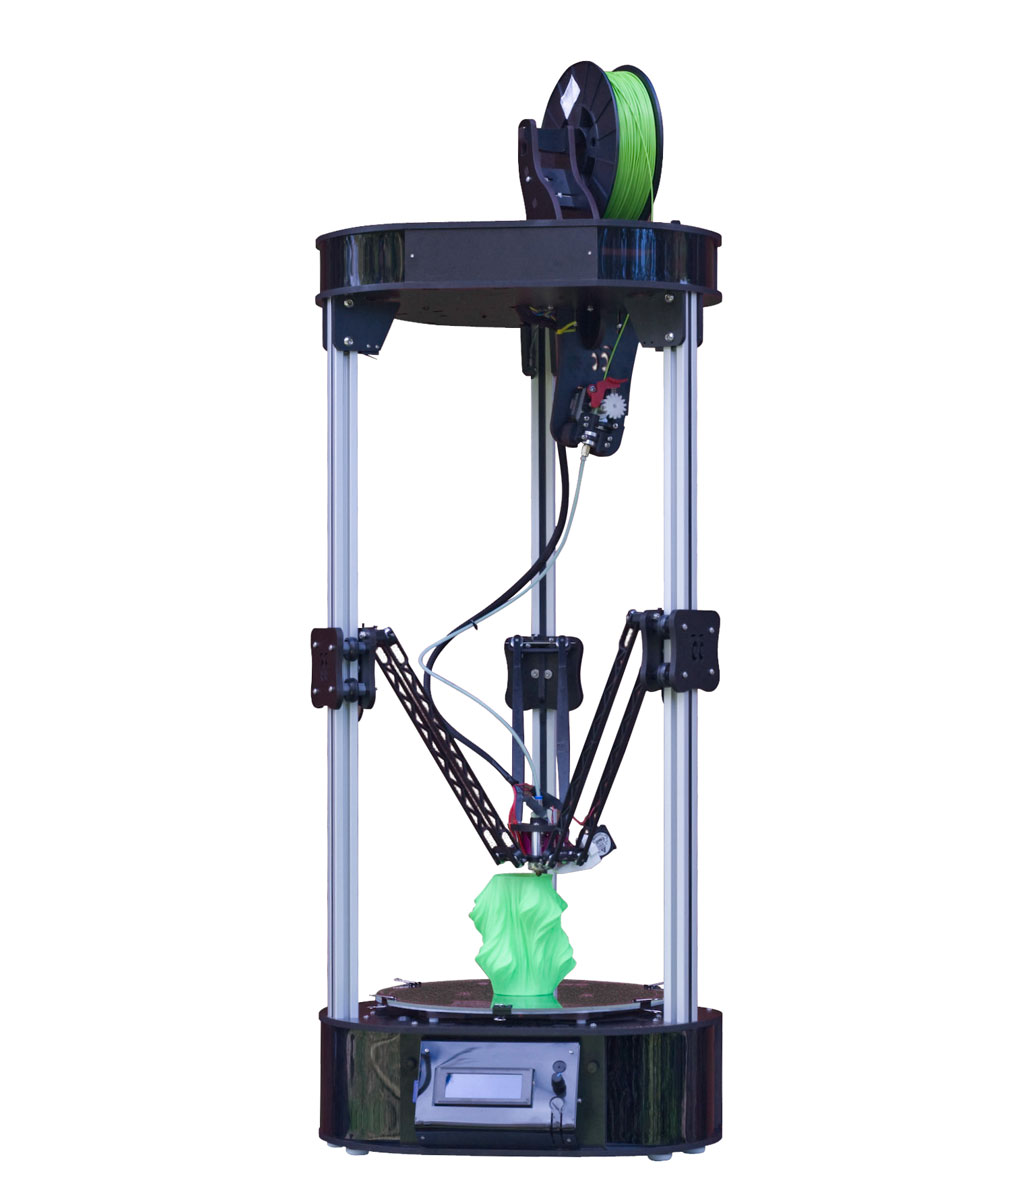 Become a participant of 3D Print Conference Kiev and win Delta Rostock 3D printer! - 1